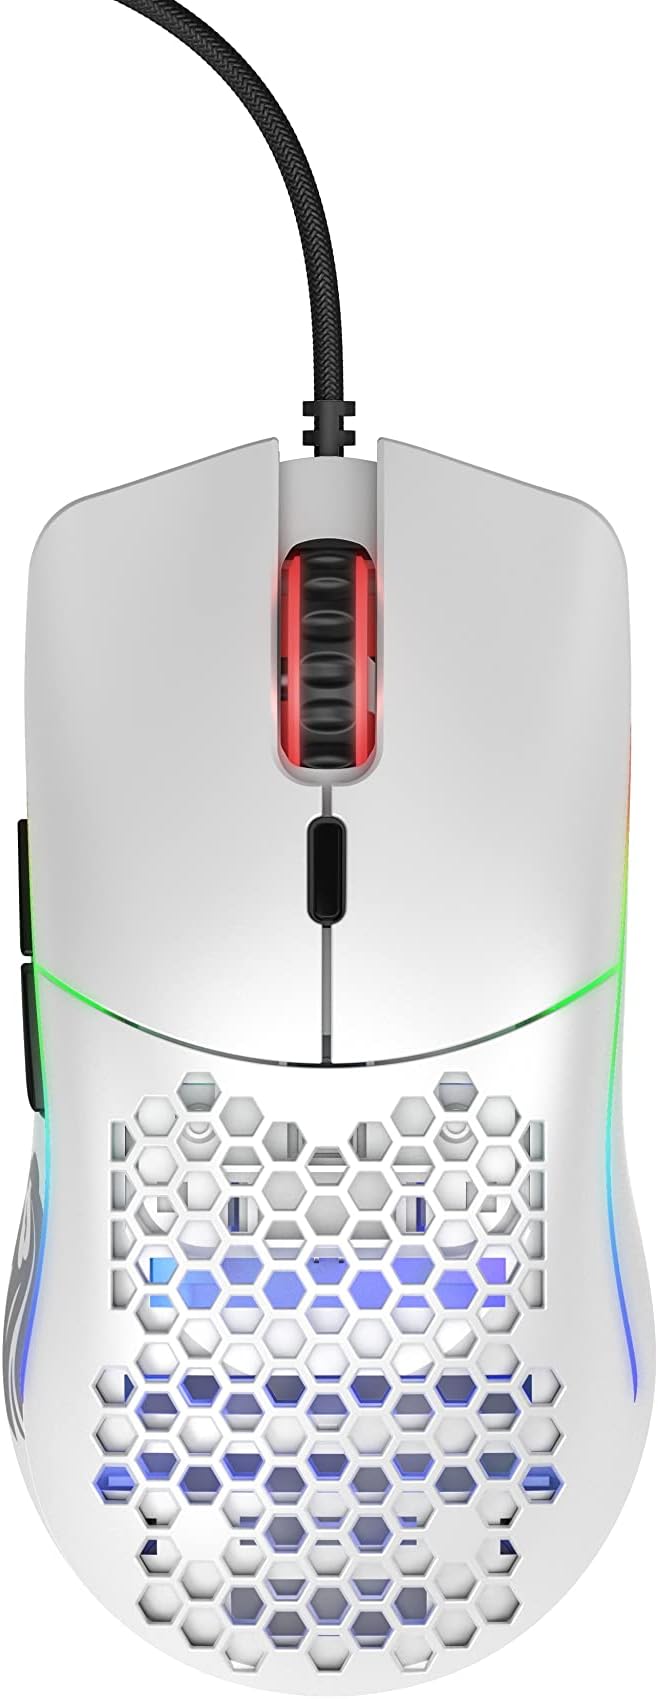 Glorious Model O - Minus Wired Gaming Mouse - RGB 58g Superlight Ergonomic Gaming Mouse - Backlit Honeycomb Shell Design Gaming Mice (Matte White)